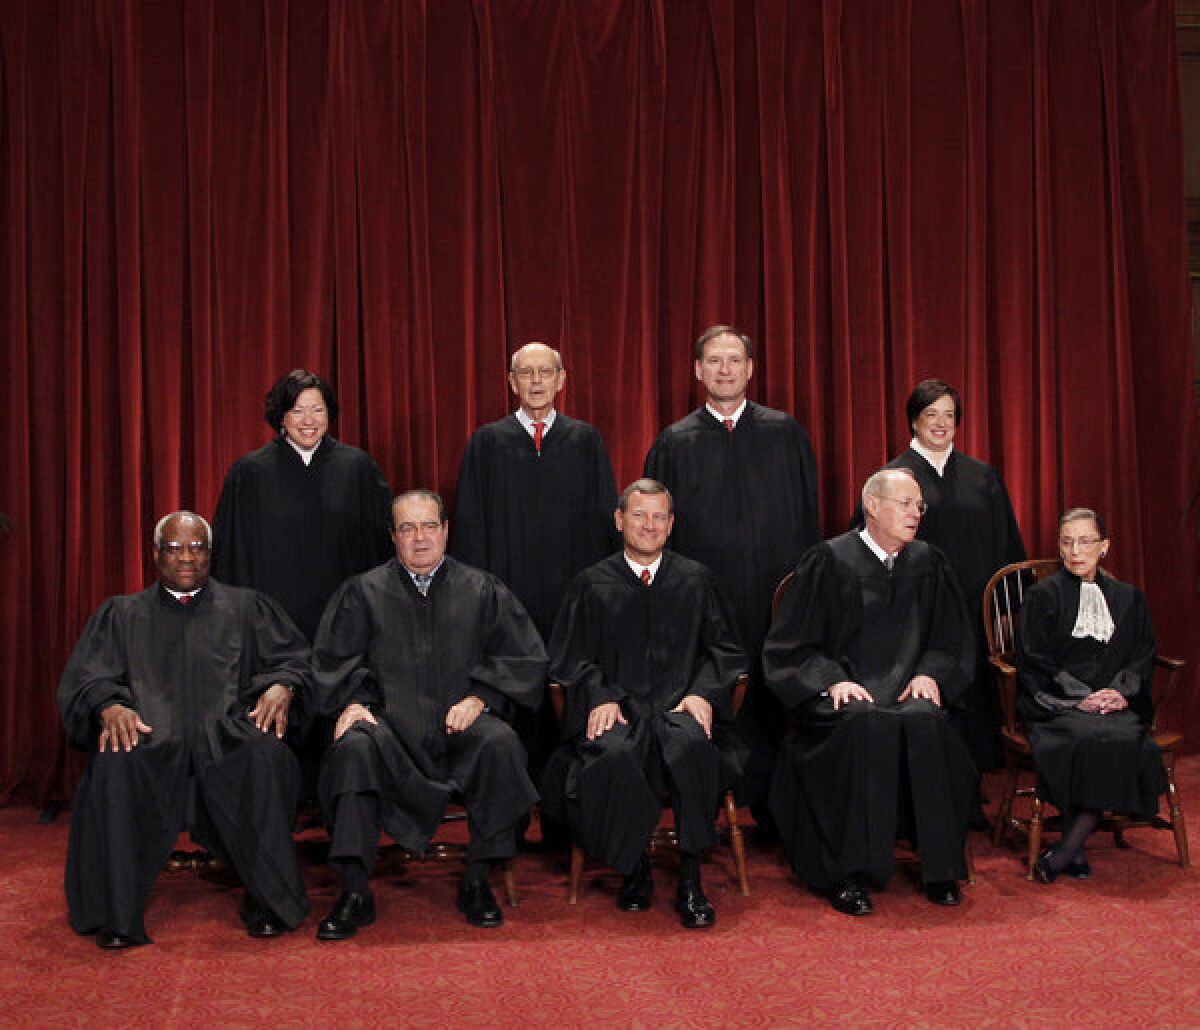 The justices of the Supreme Court, seen in a 2010 group portrait.